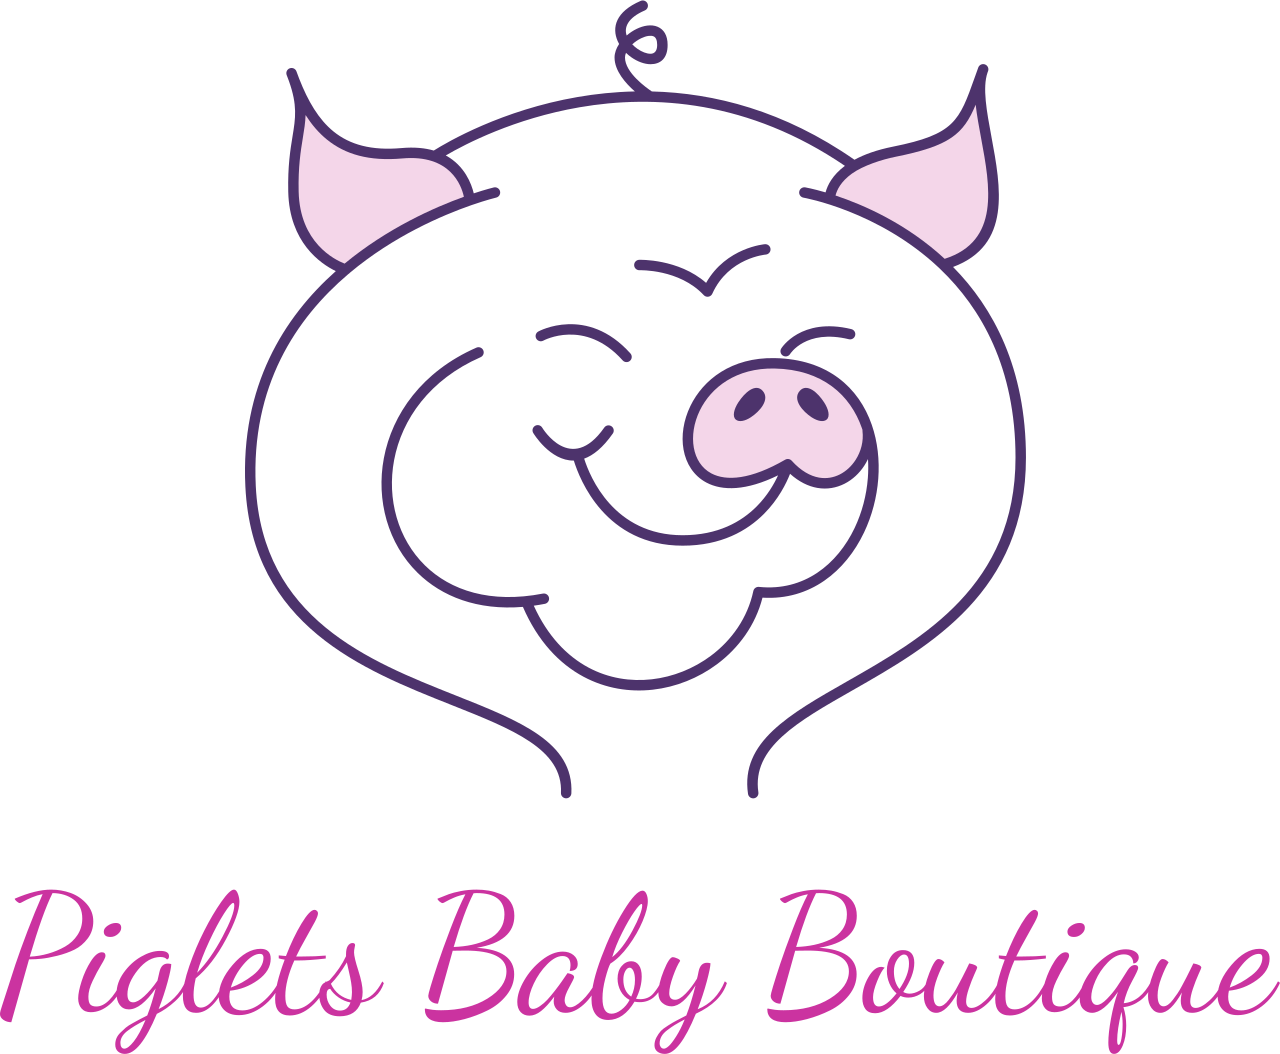 Piglets Baby Boutique's web page